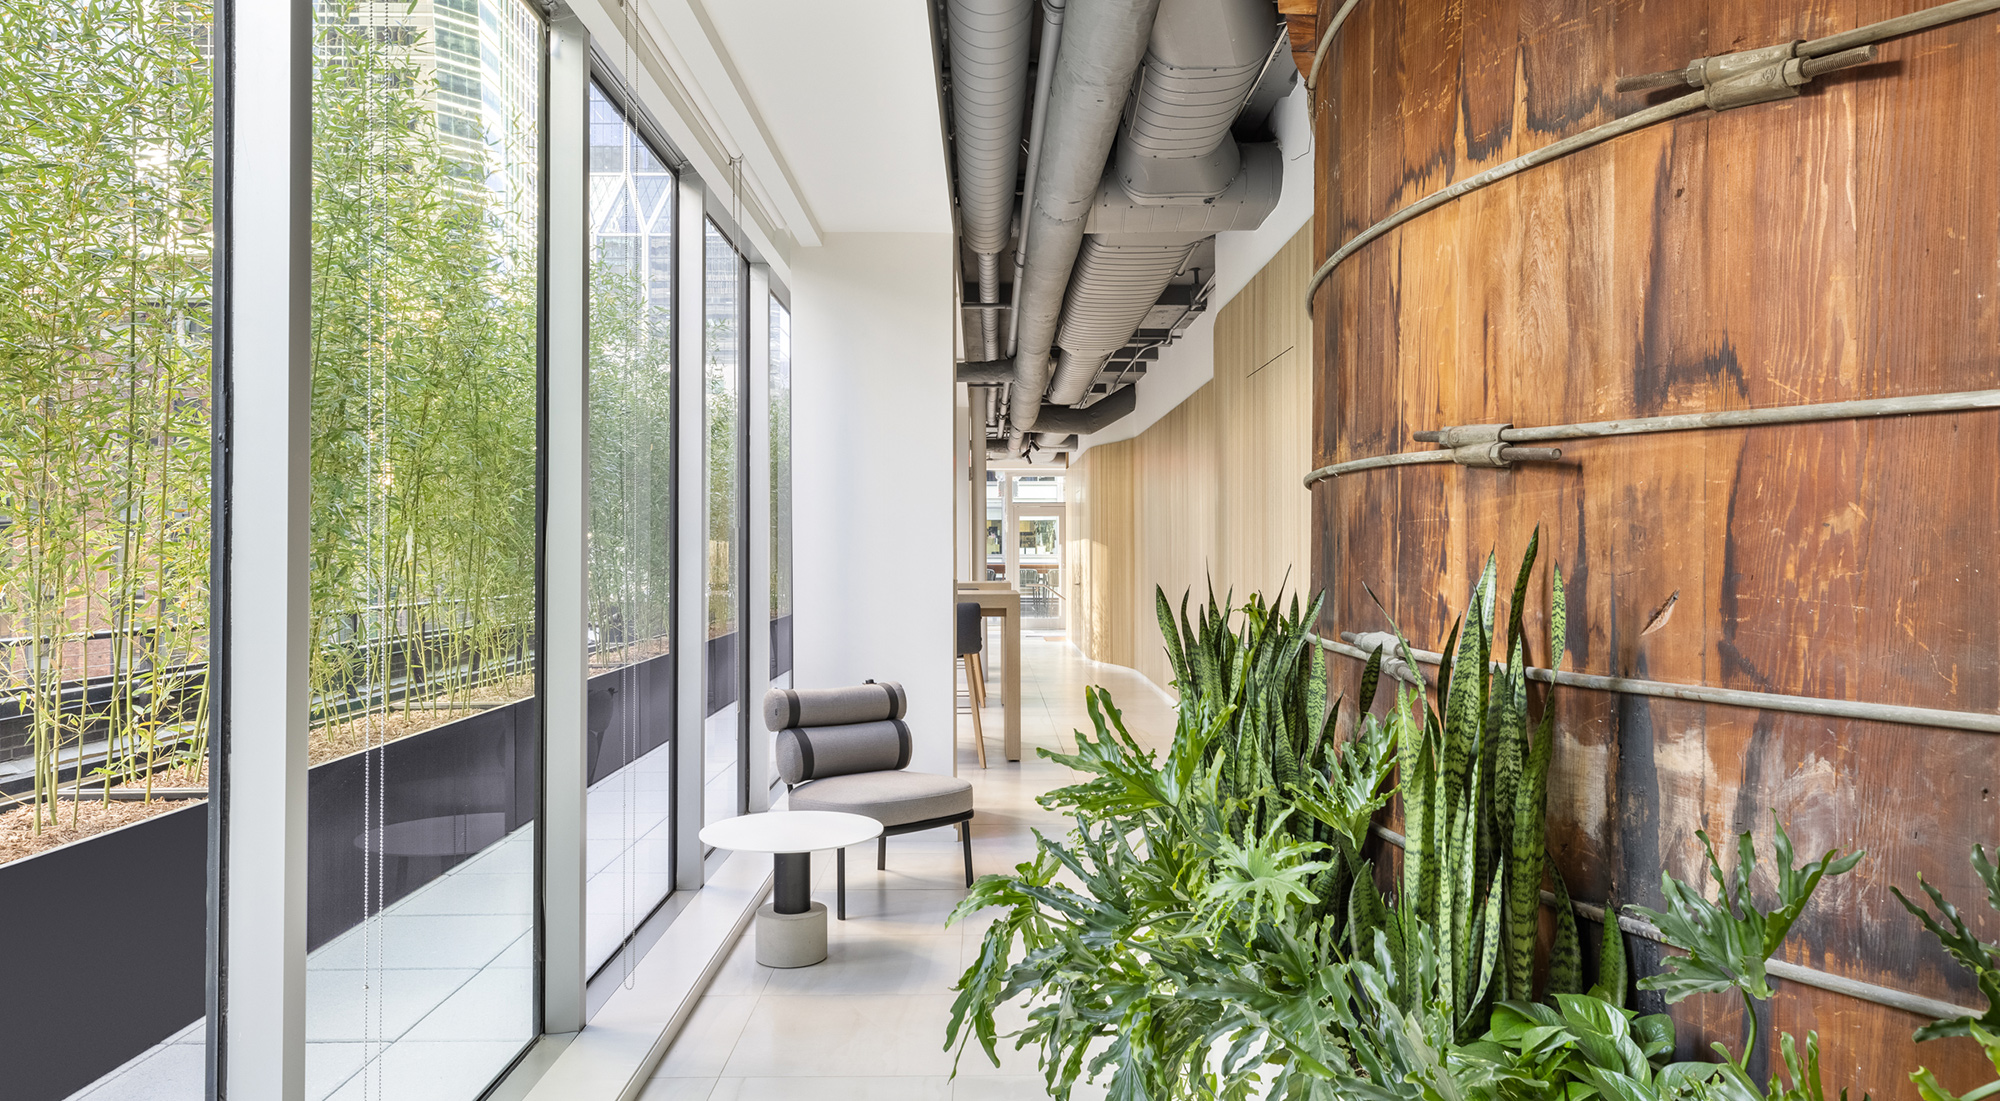 A hallway that nestles small, private work spaces and live plants